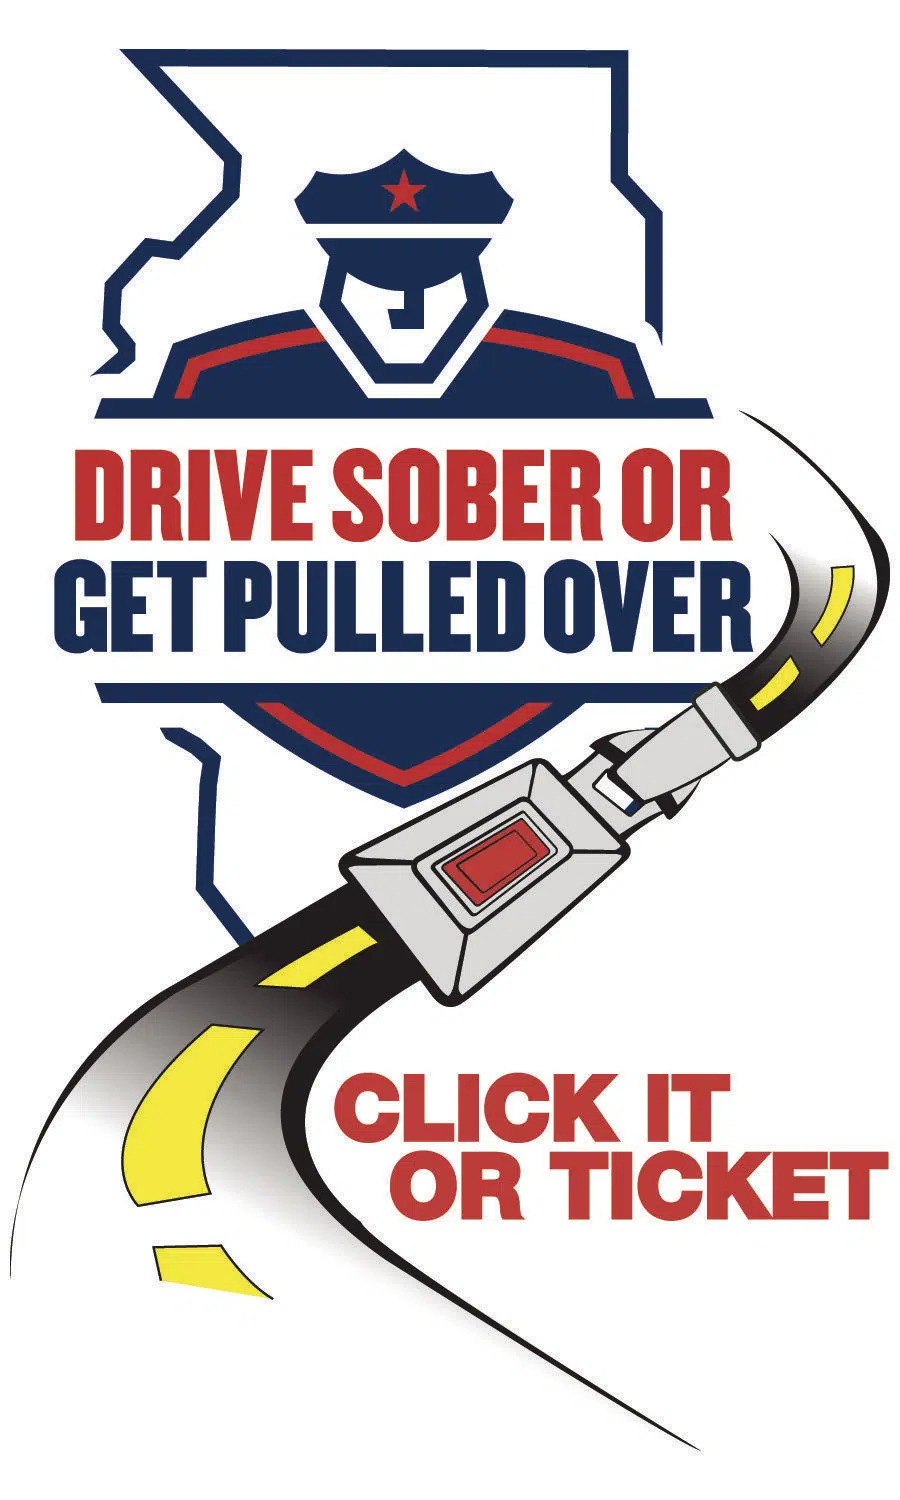 Decatur Police Department begins July Fourth crackdown on drunk drivers and seat belt law violators